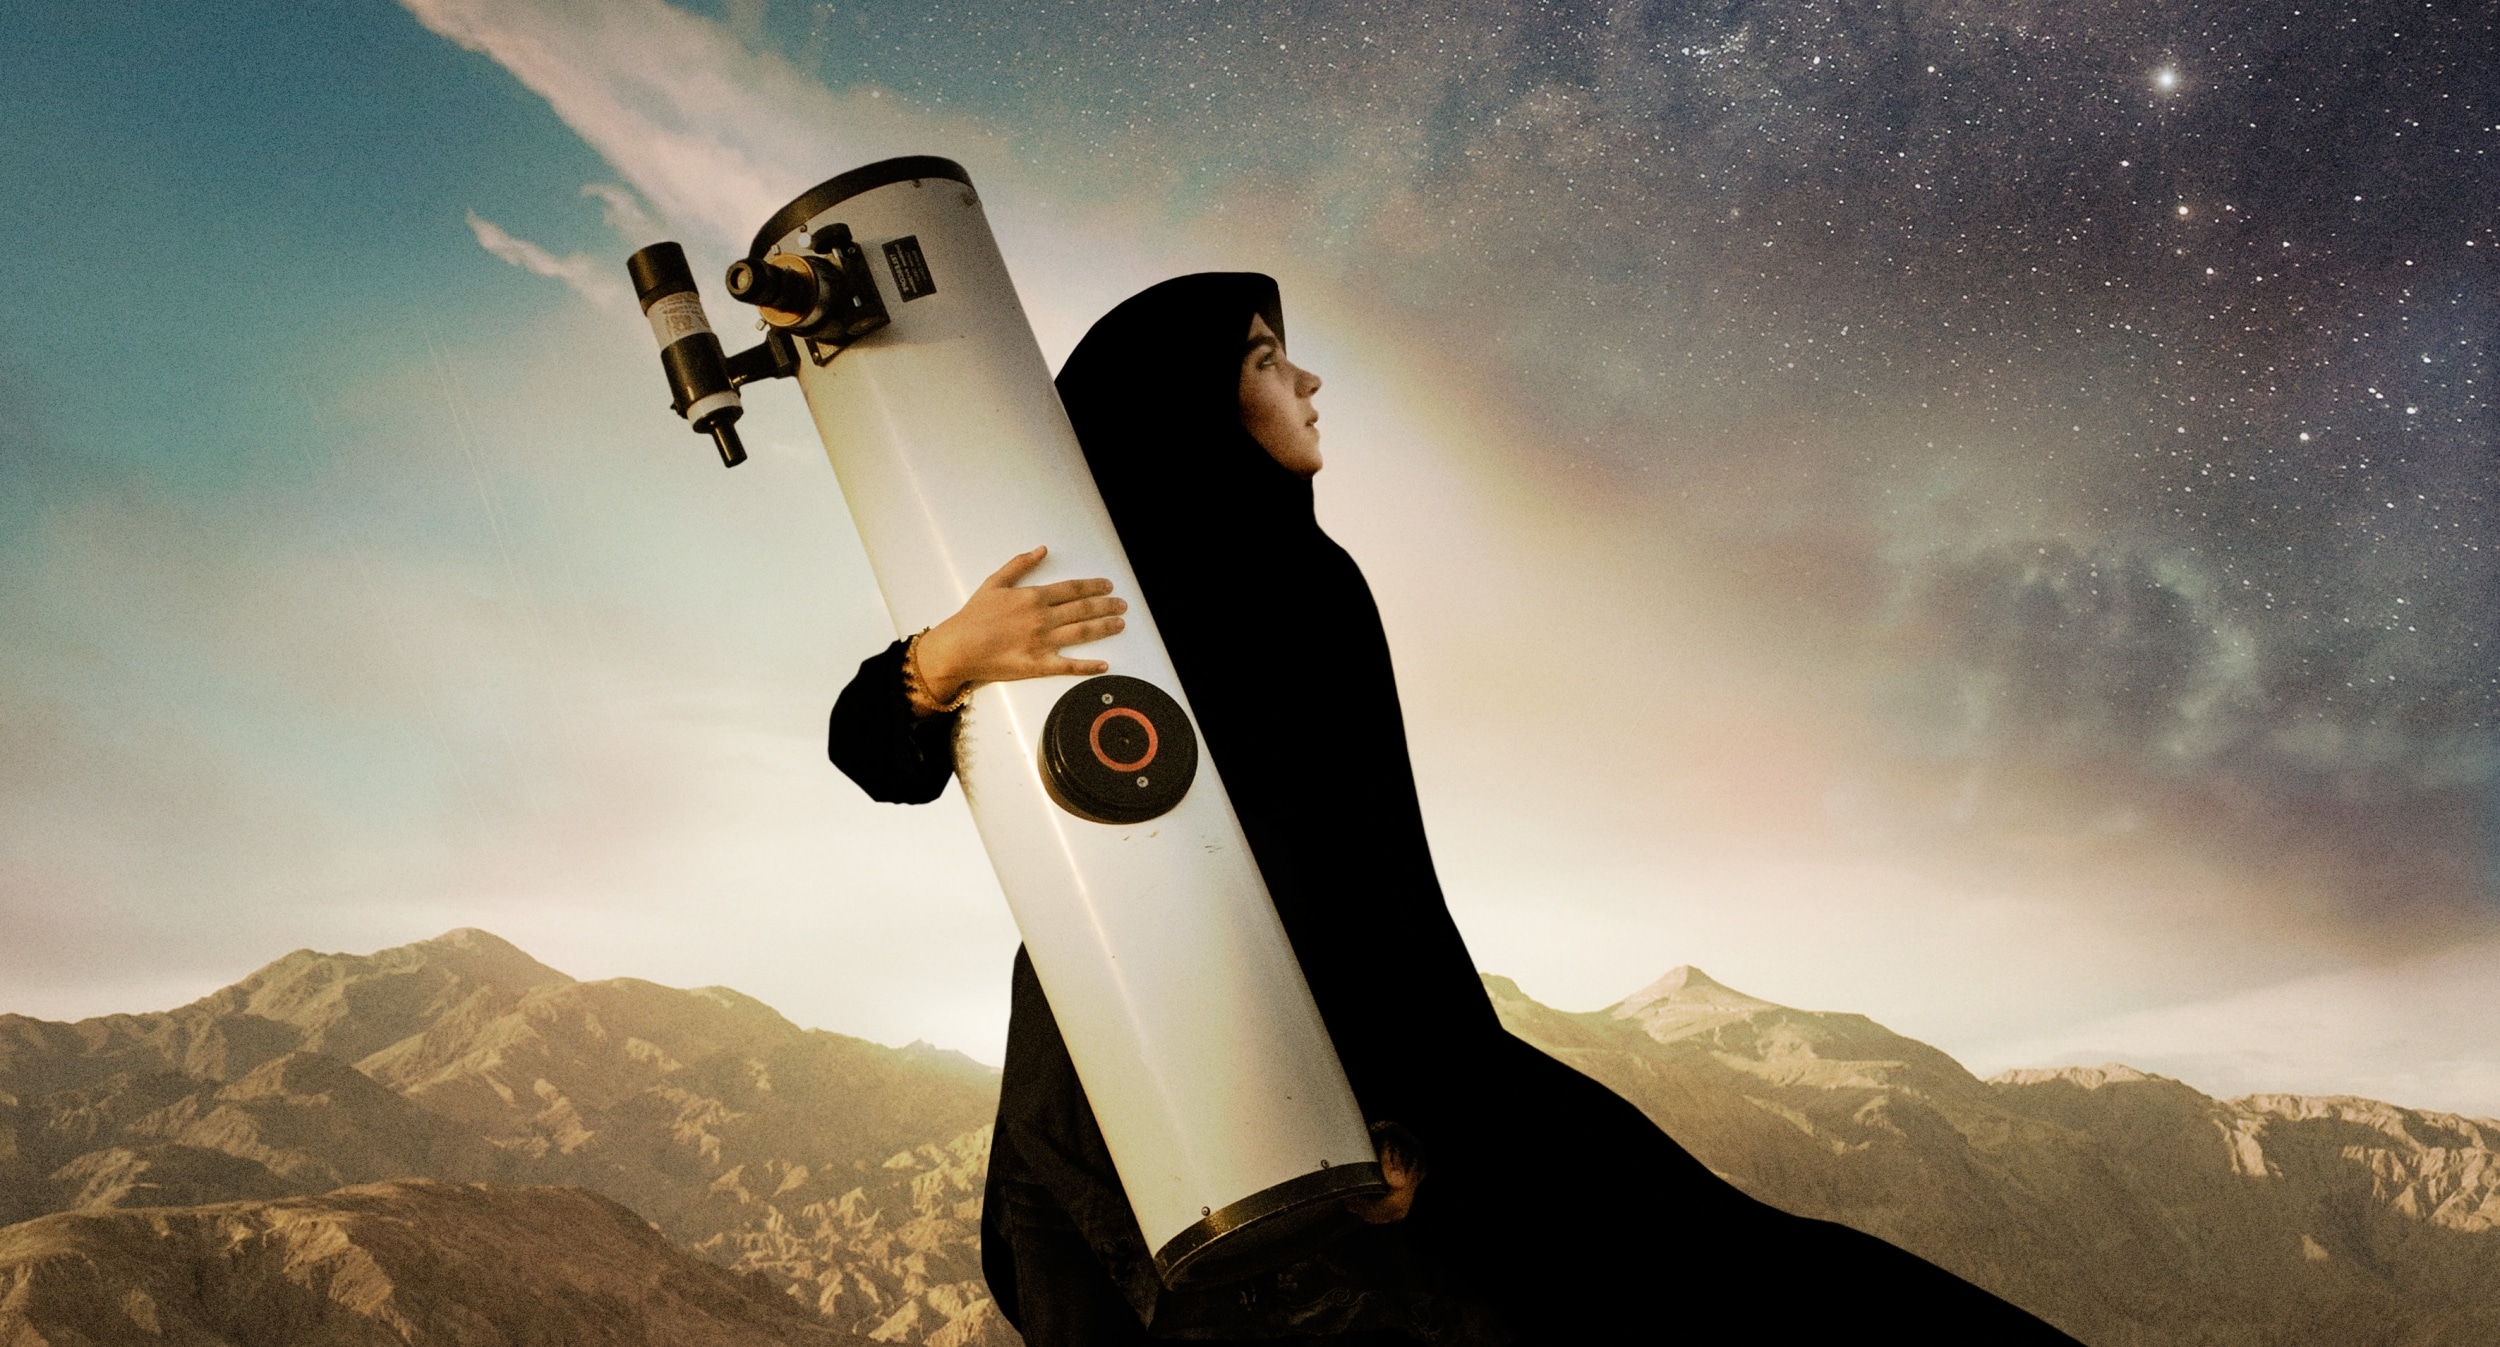 Sepideh Reaching for the Stars